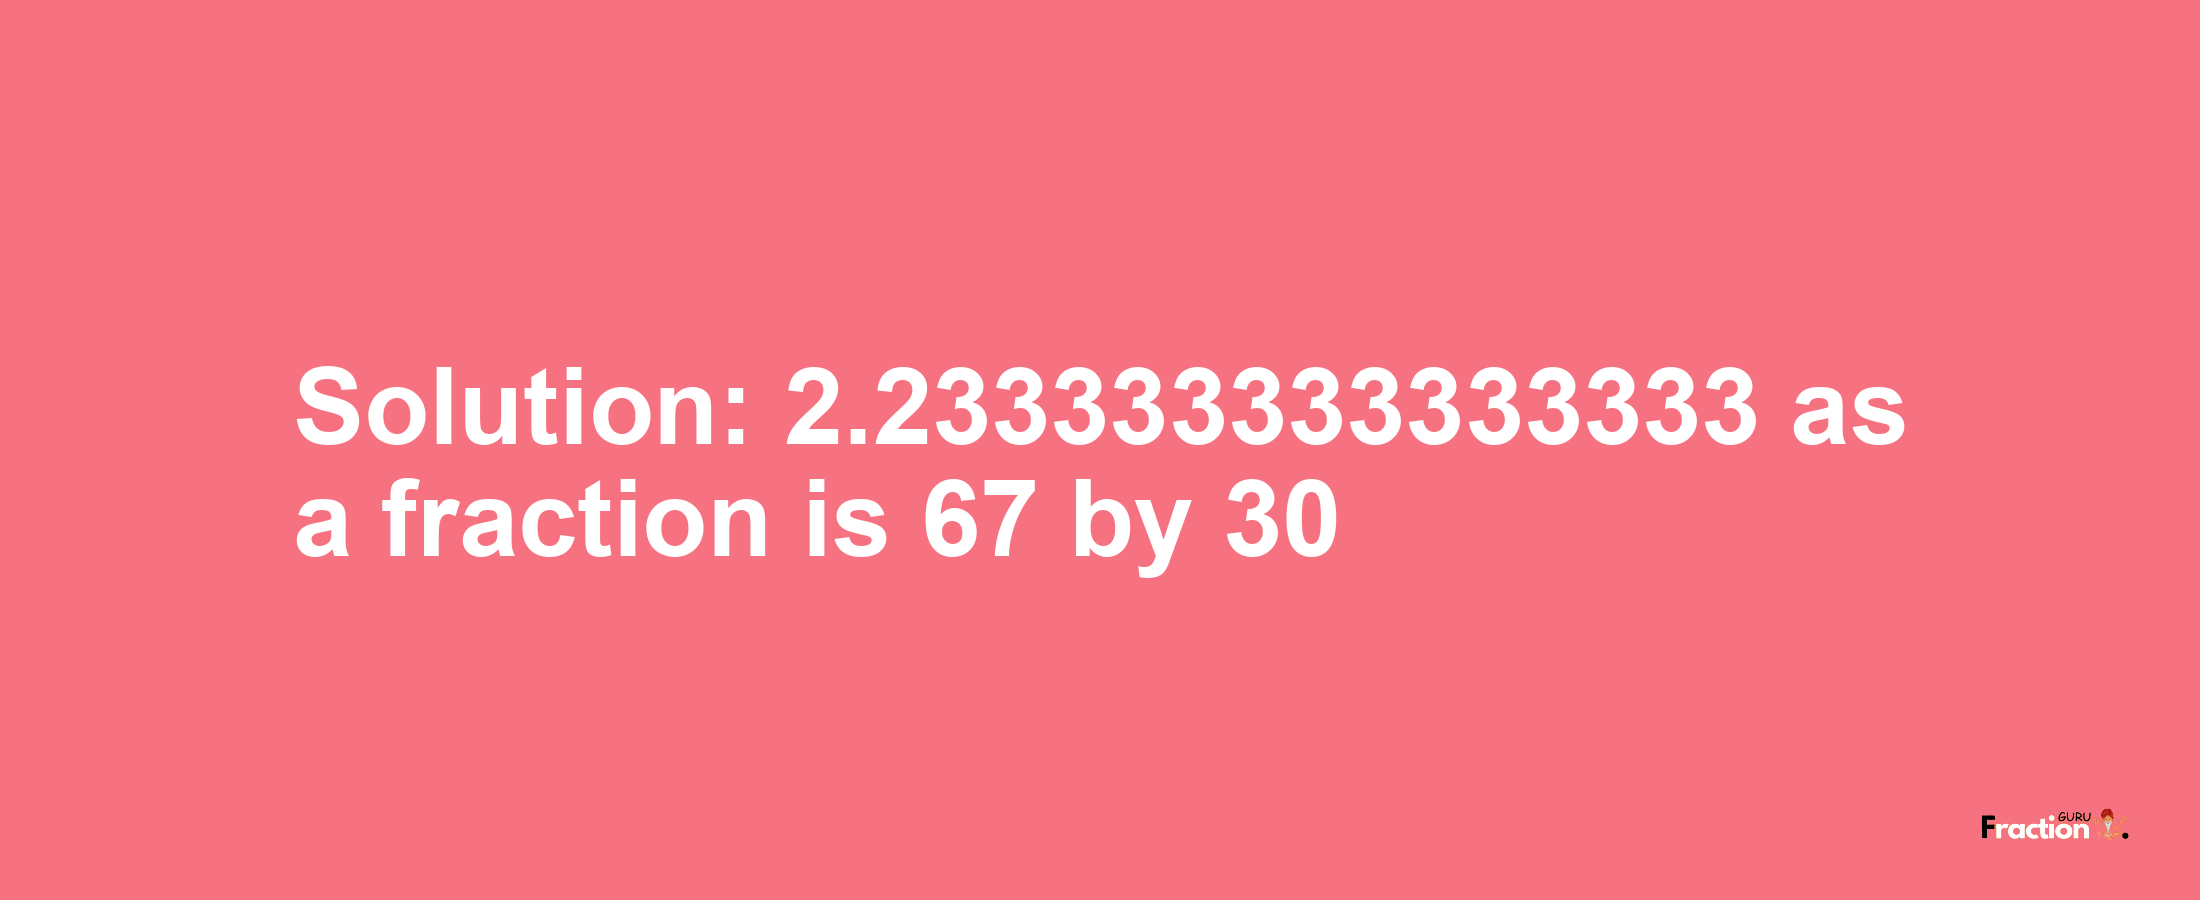 Solution:2.233333333333333 as a fraction is 67/30